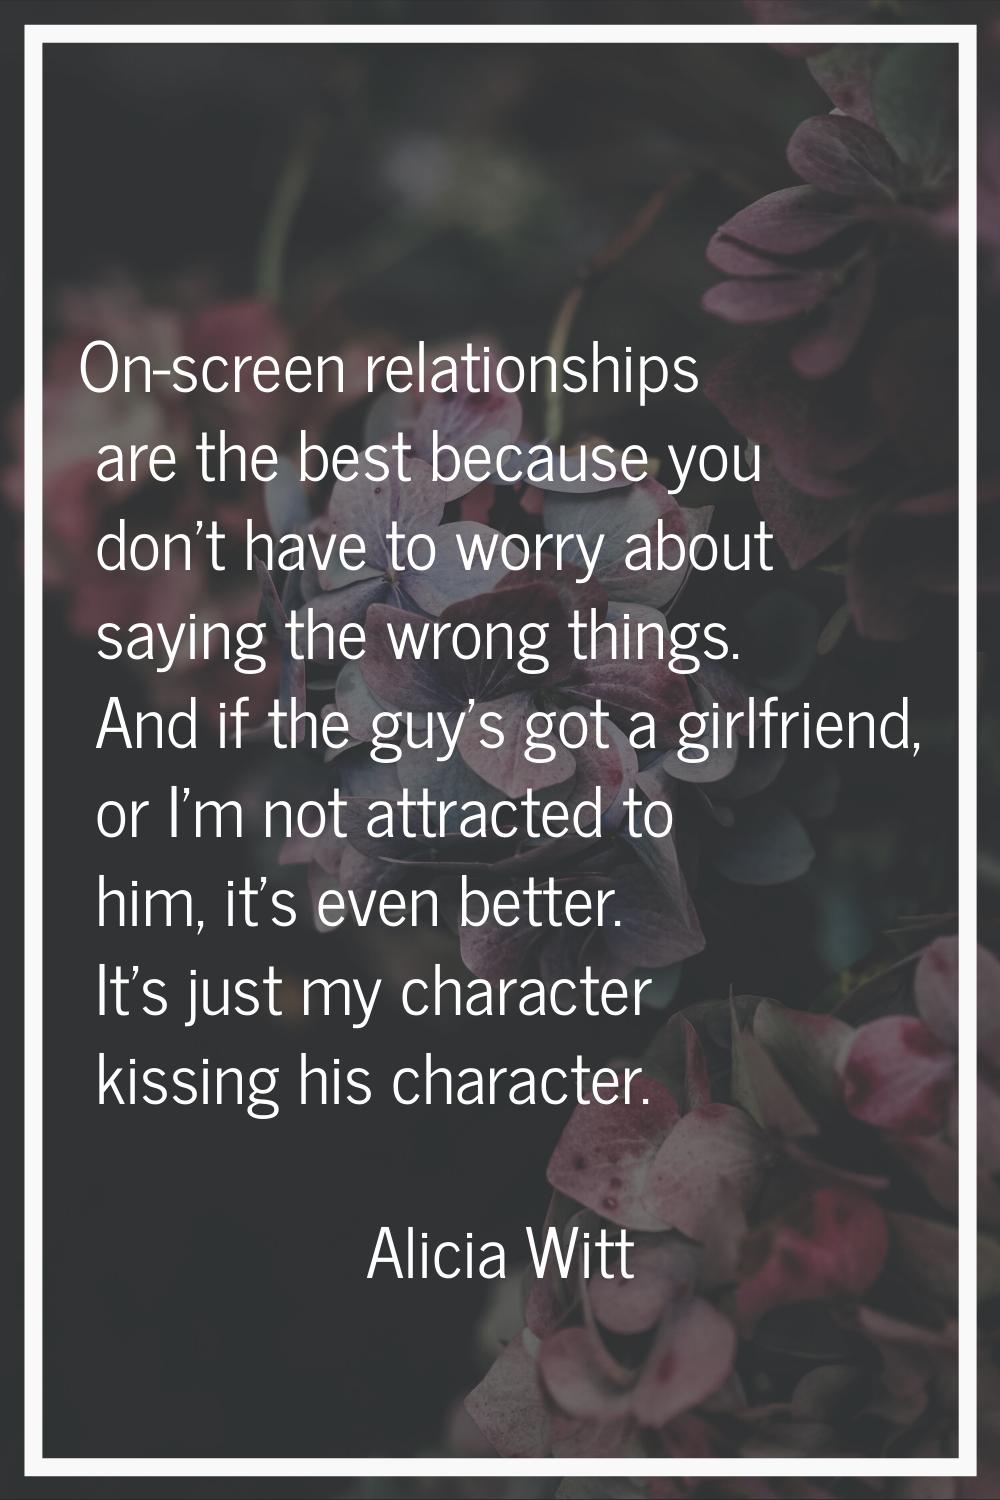 On-screen relationships are the best because you don't have to worry about saying the wrong things.